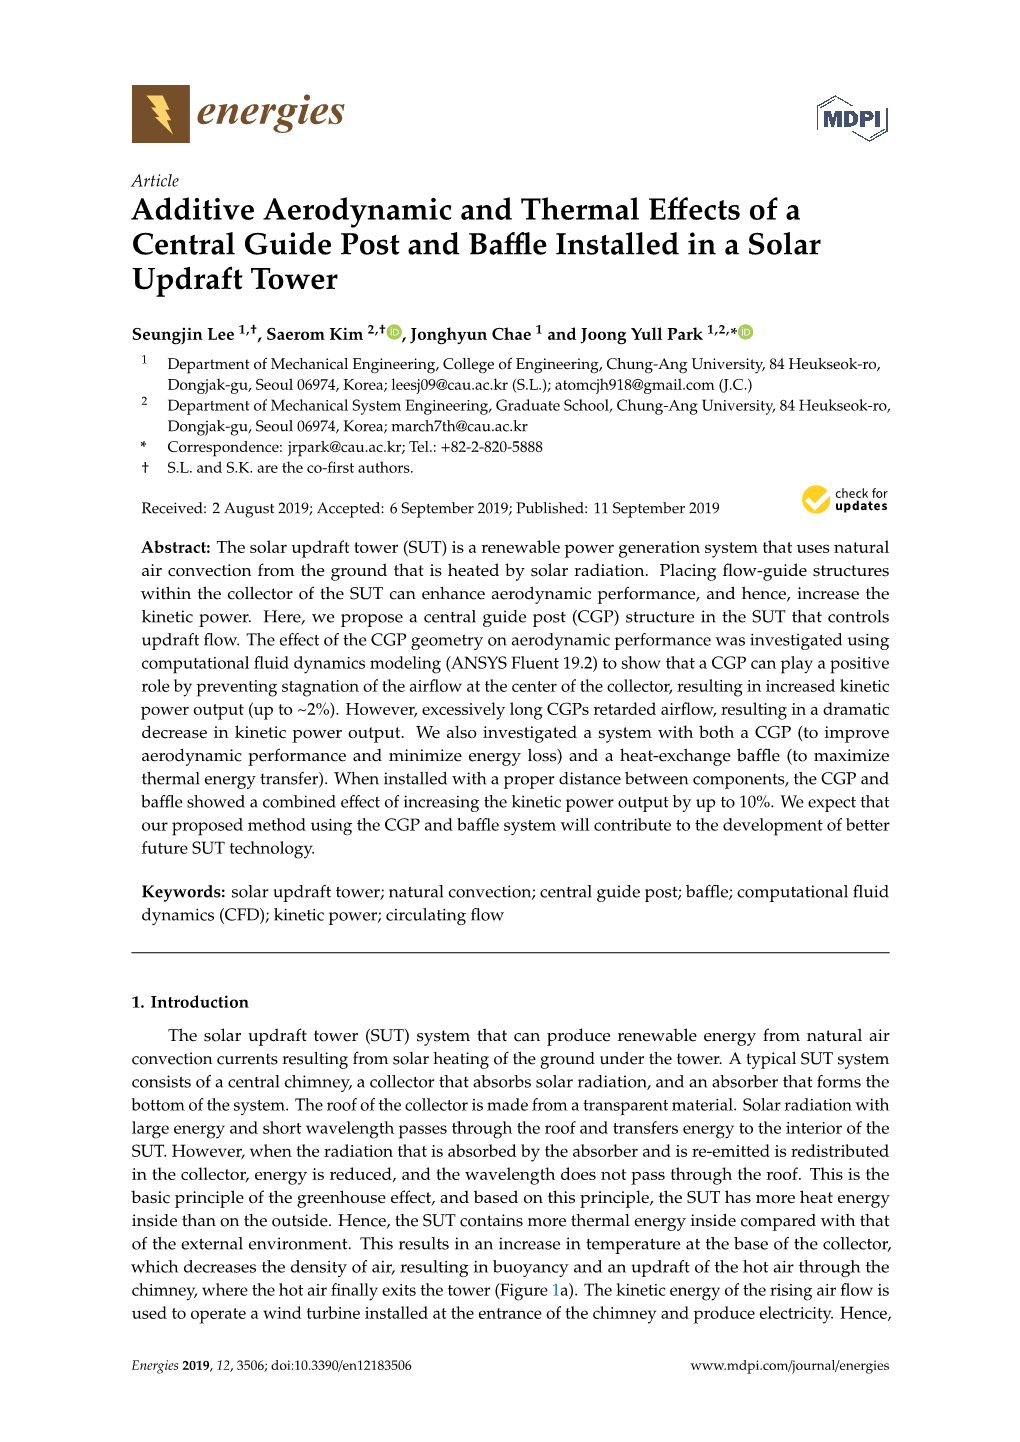 Additive Aerodynamic and Thermal Effects of a Central Guide Post and Baffle Installed in a Solar